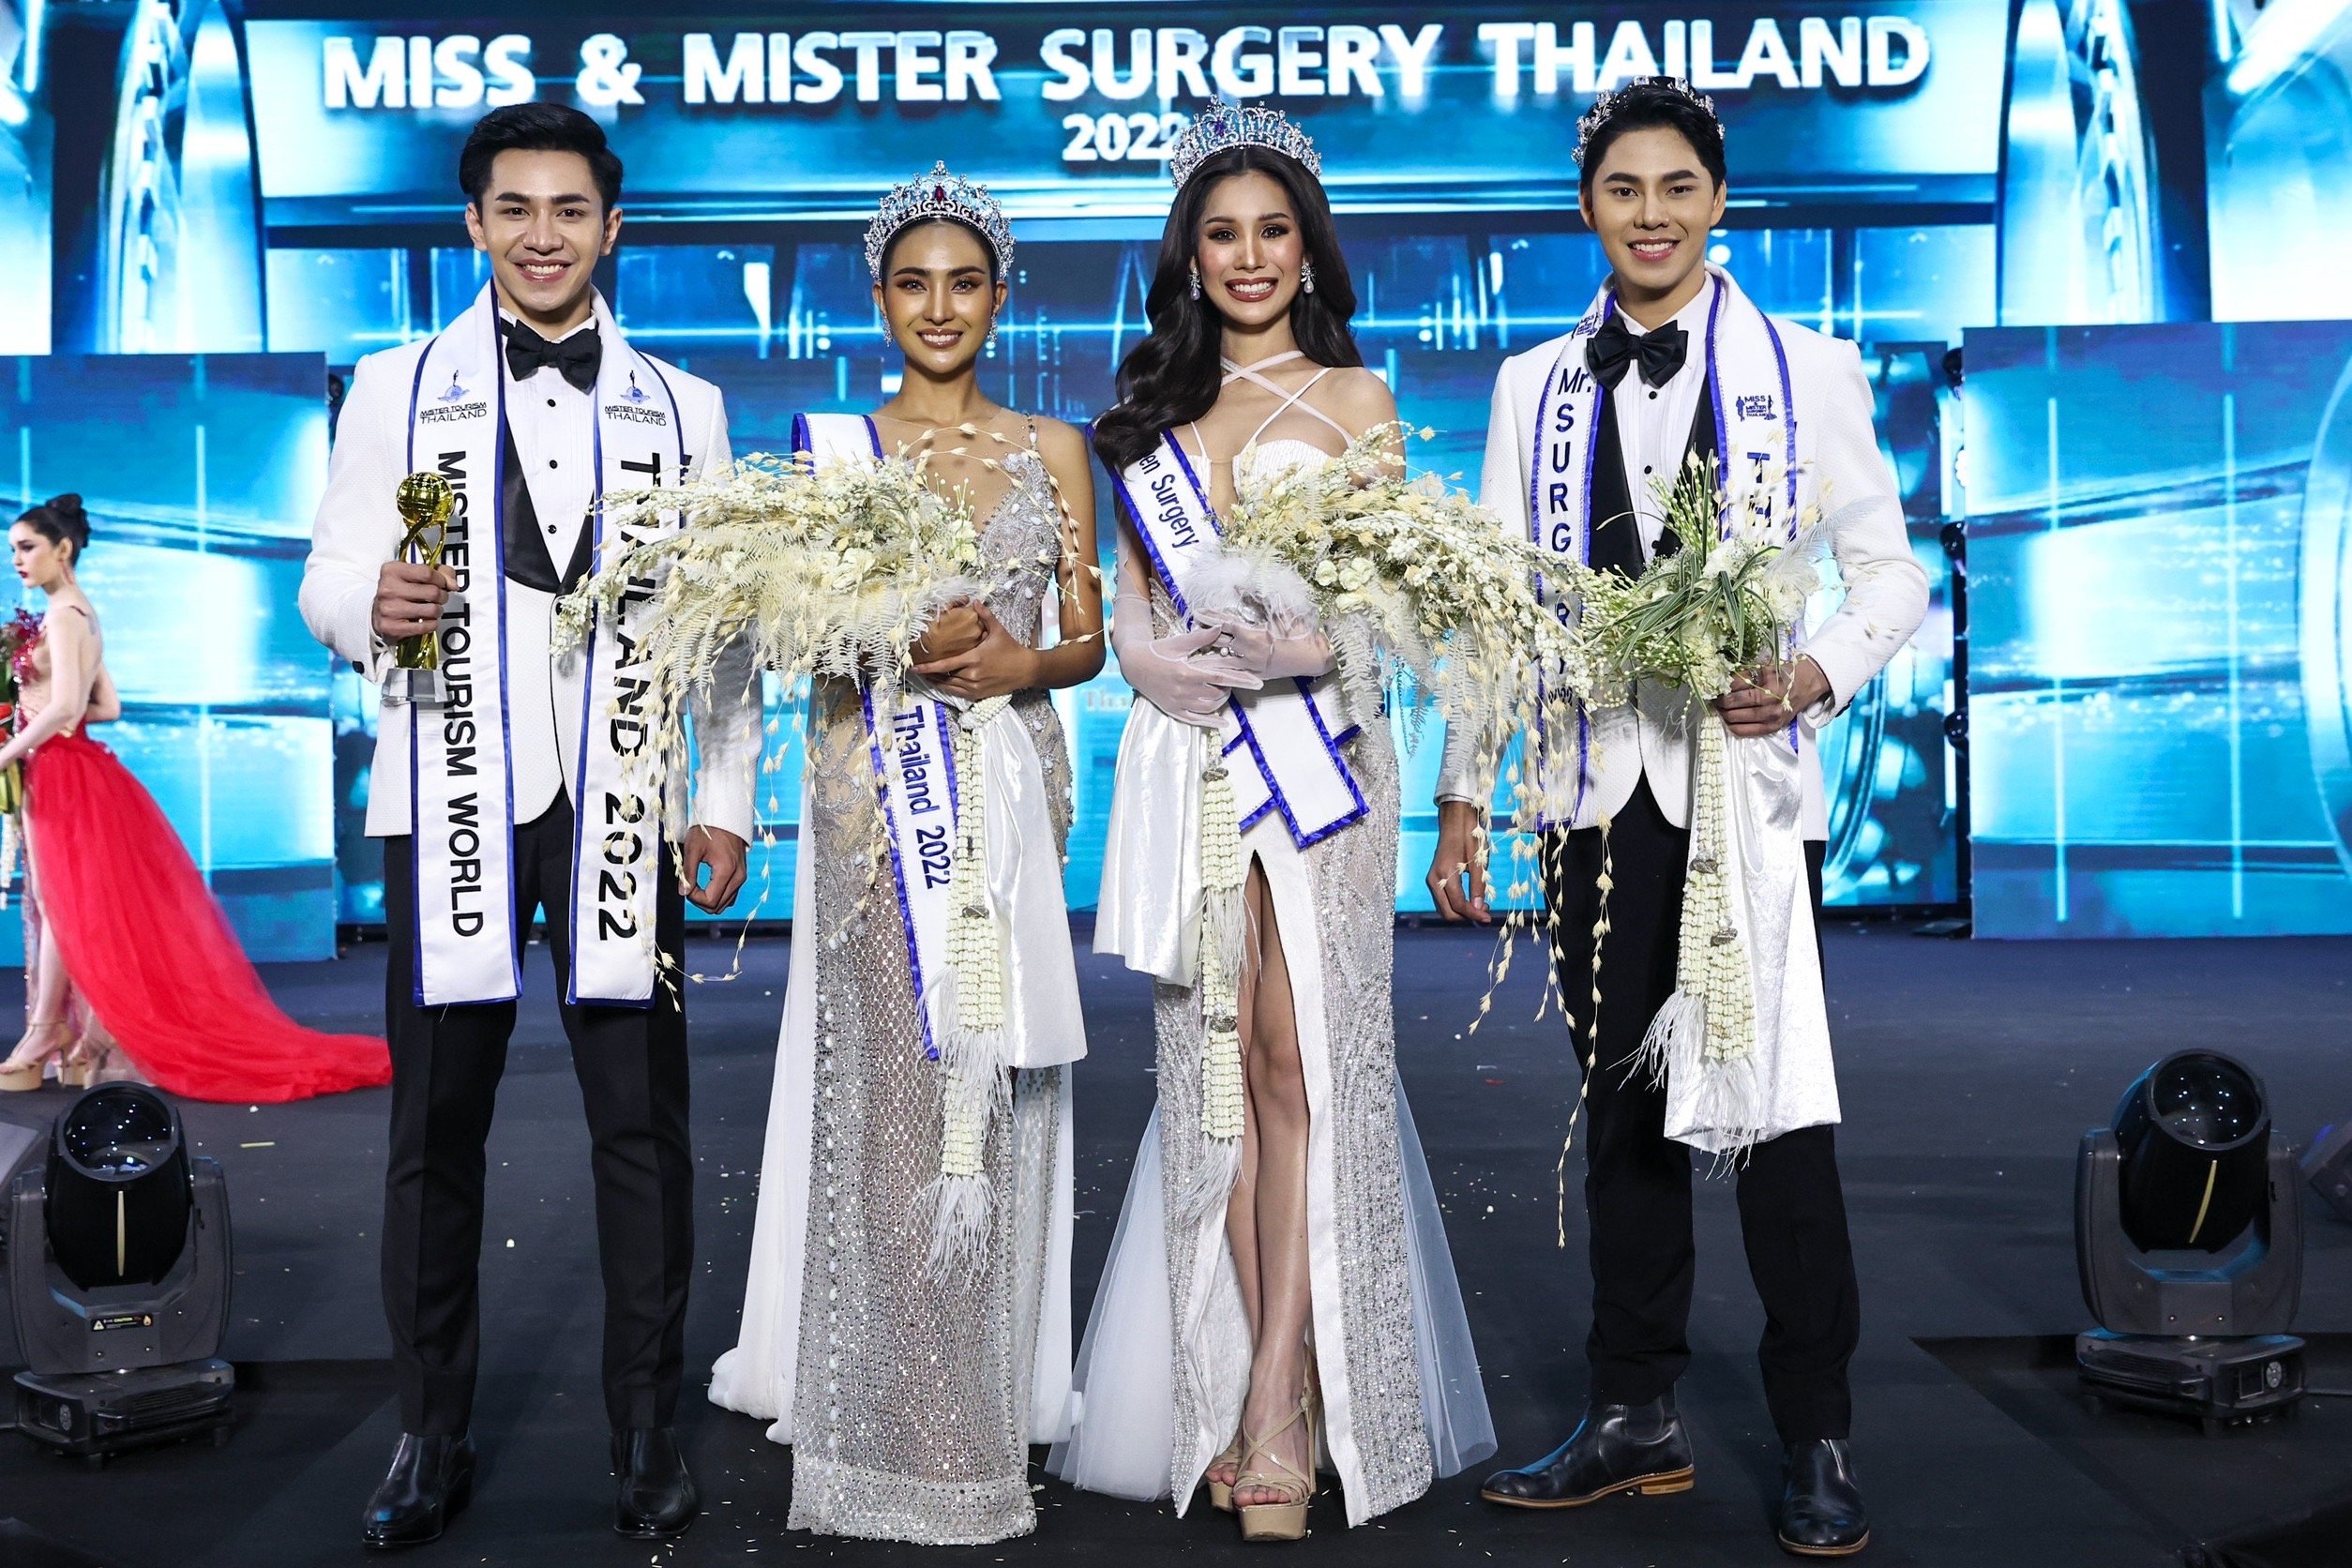 Miss and Mister Surgery Thailand 2022 